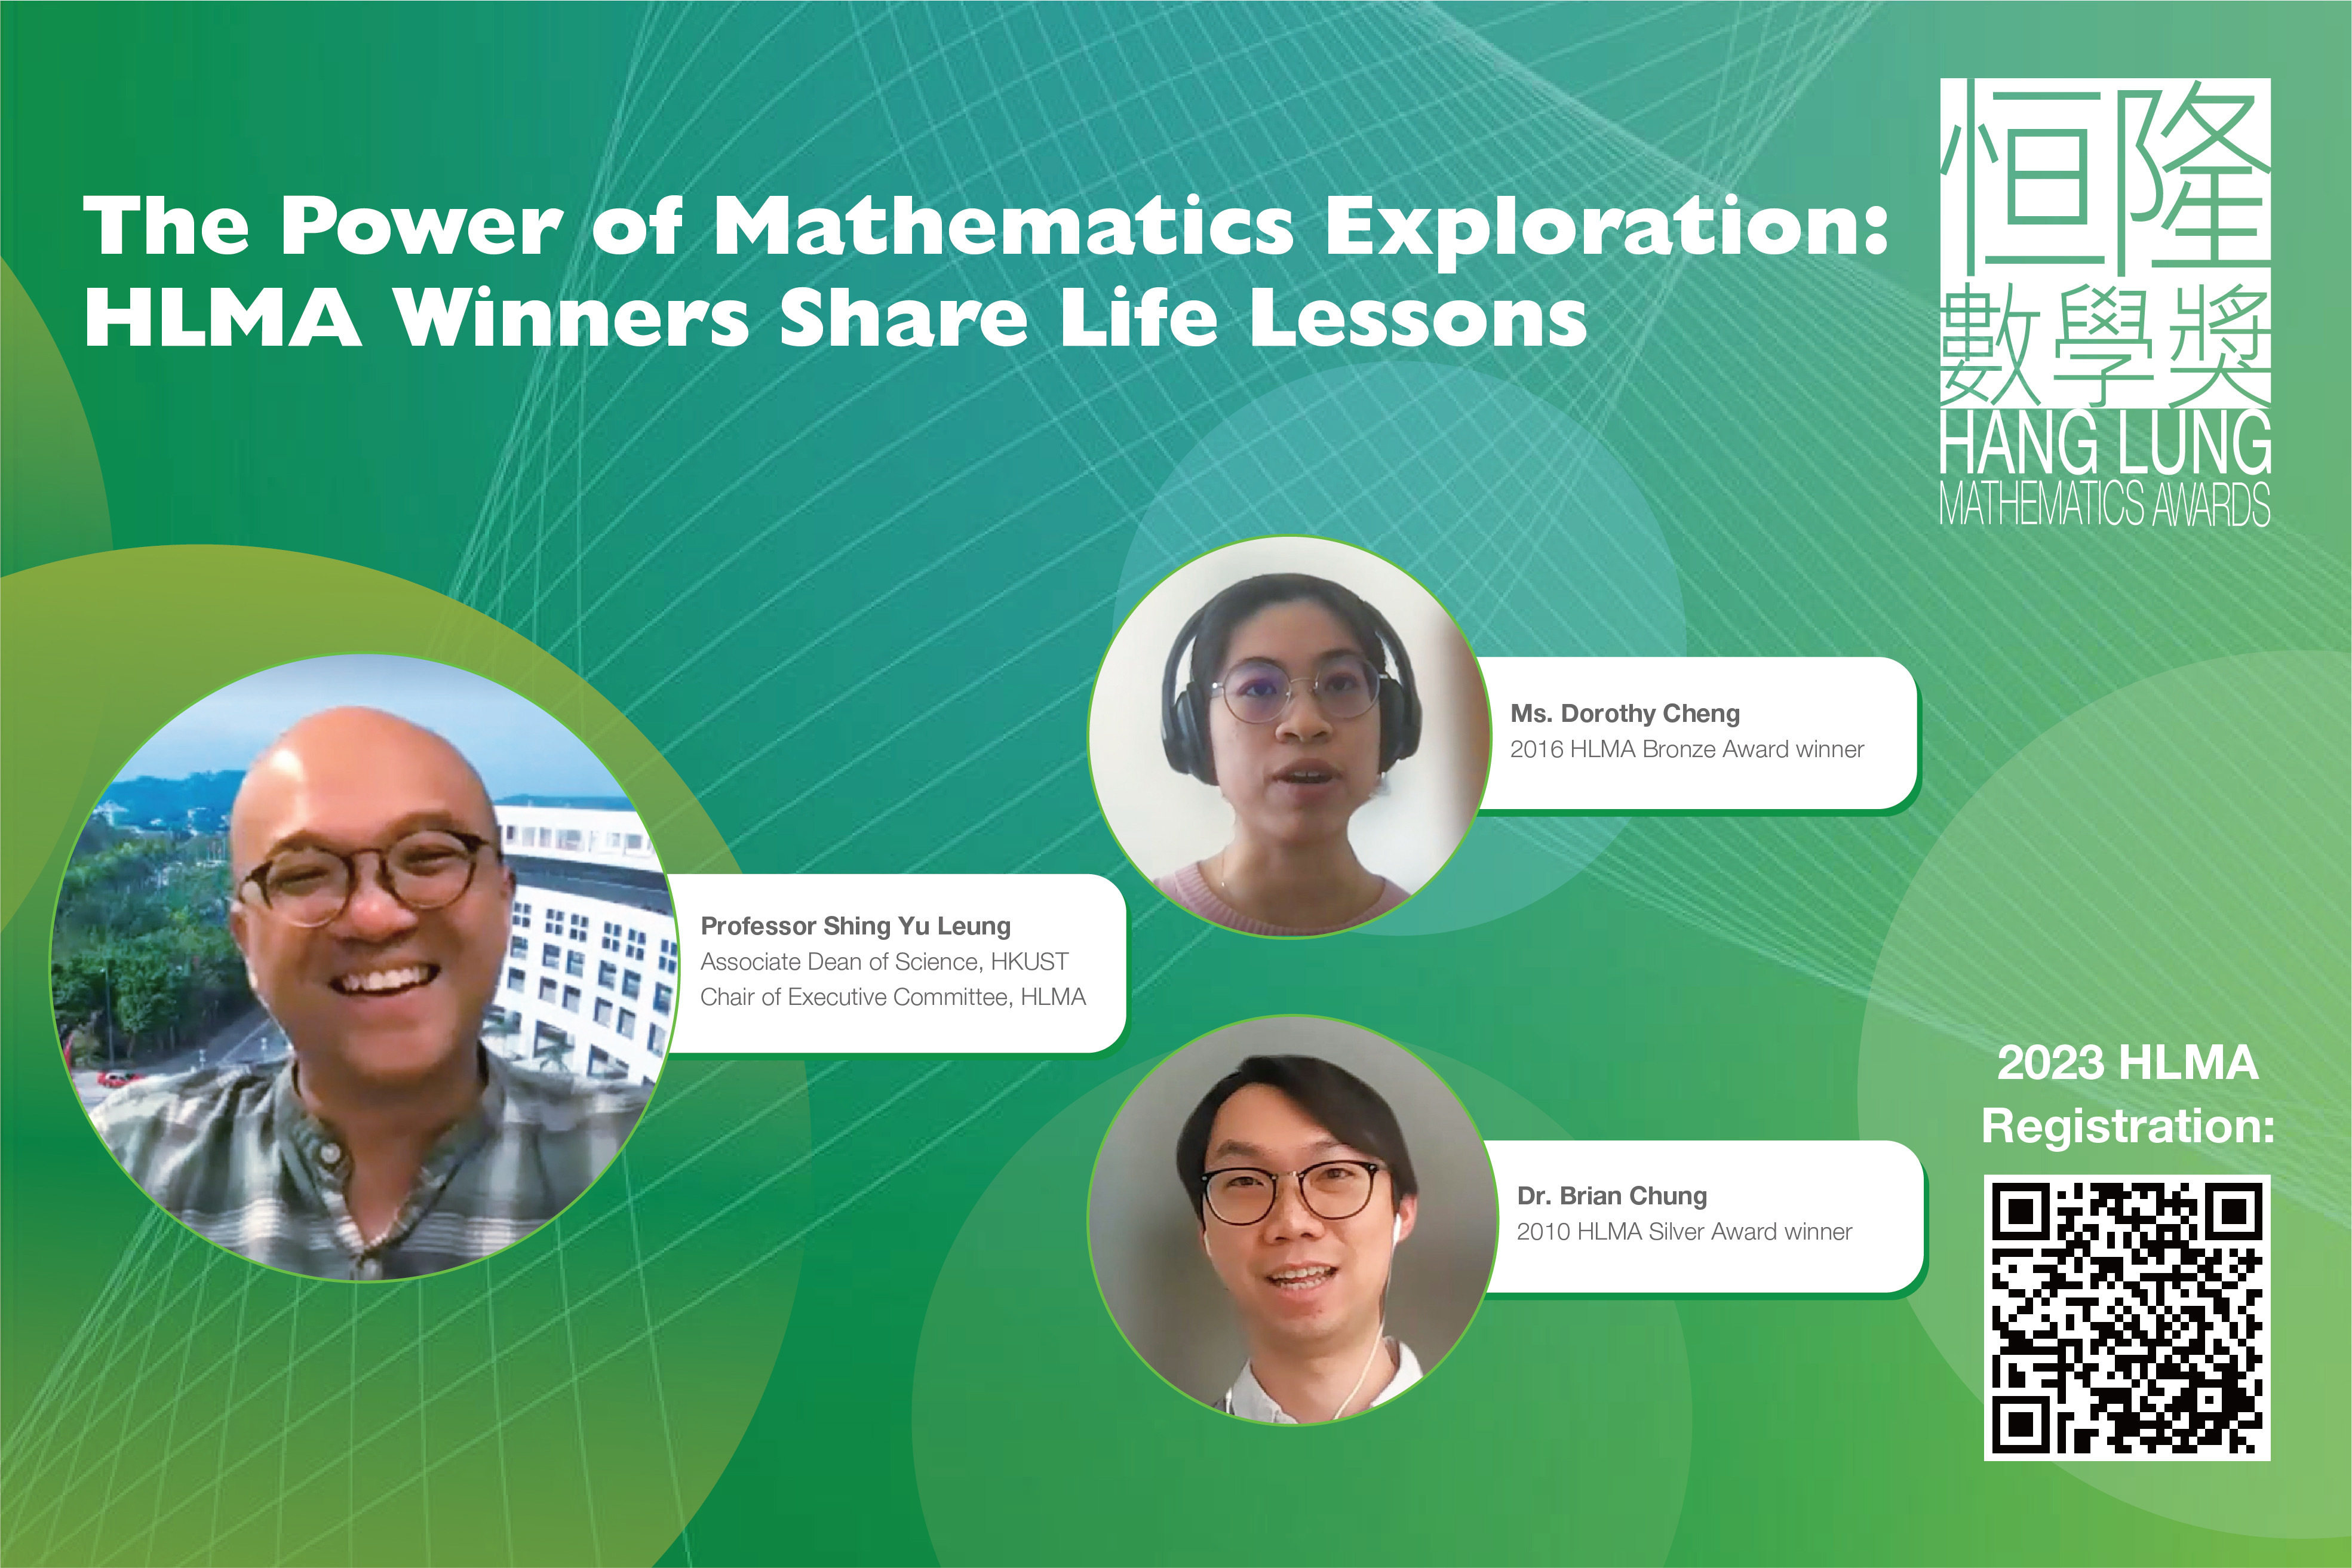 Former HKMLA winners shared what they learned from the competition and how it encouraged their love of maths. Photo: Handout